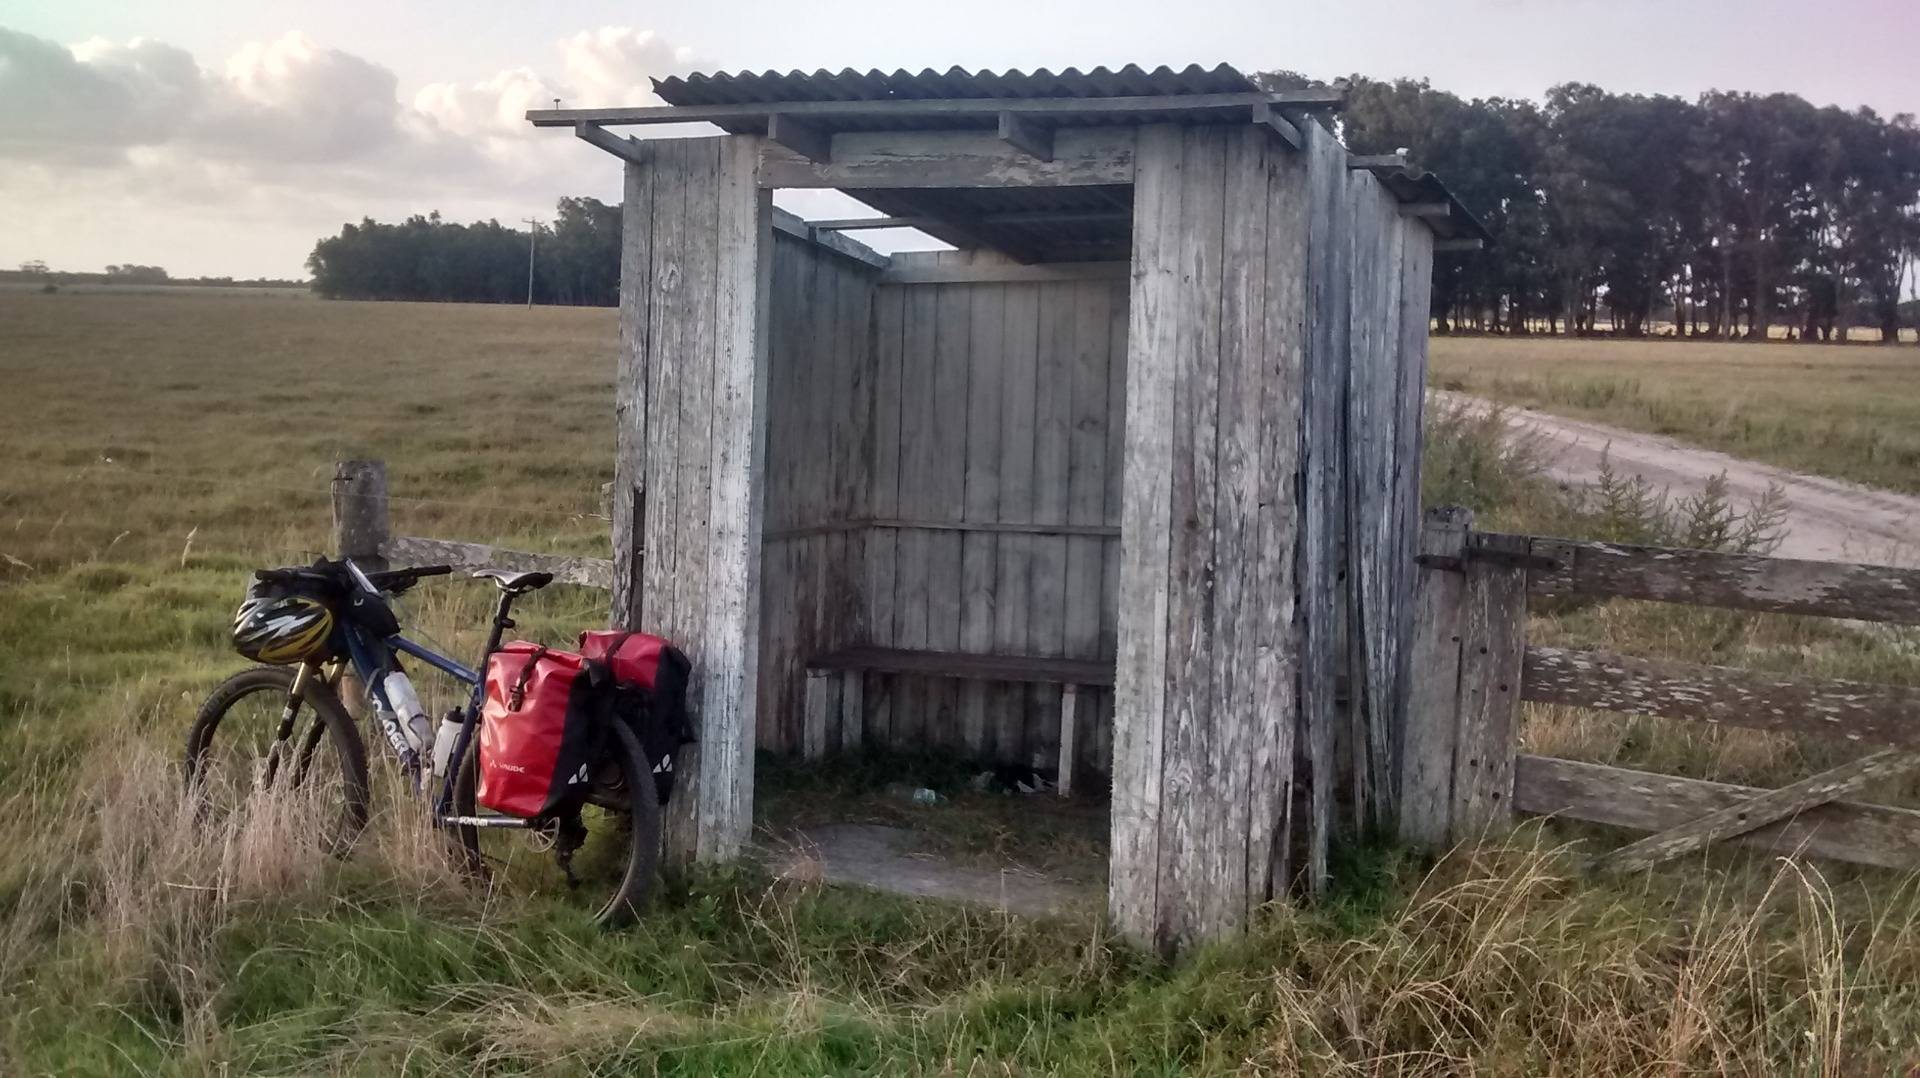 Small countryside bus stop in southern Brazil